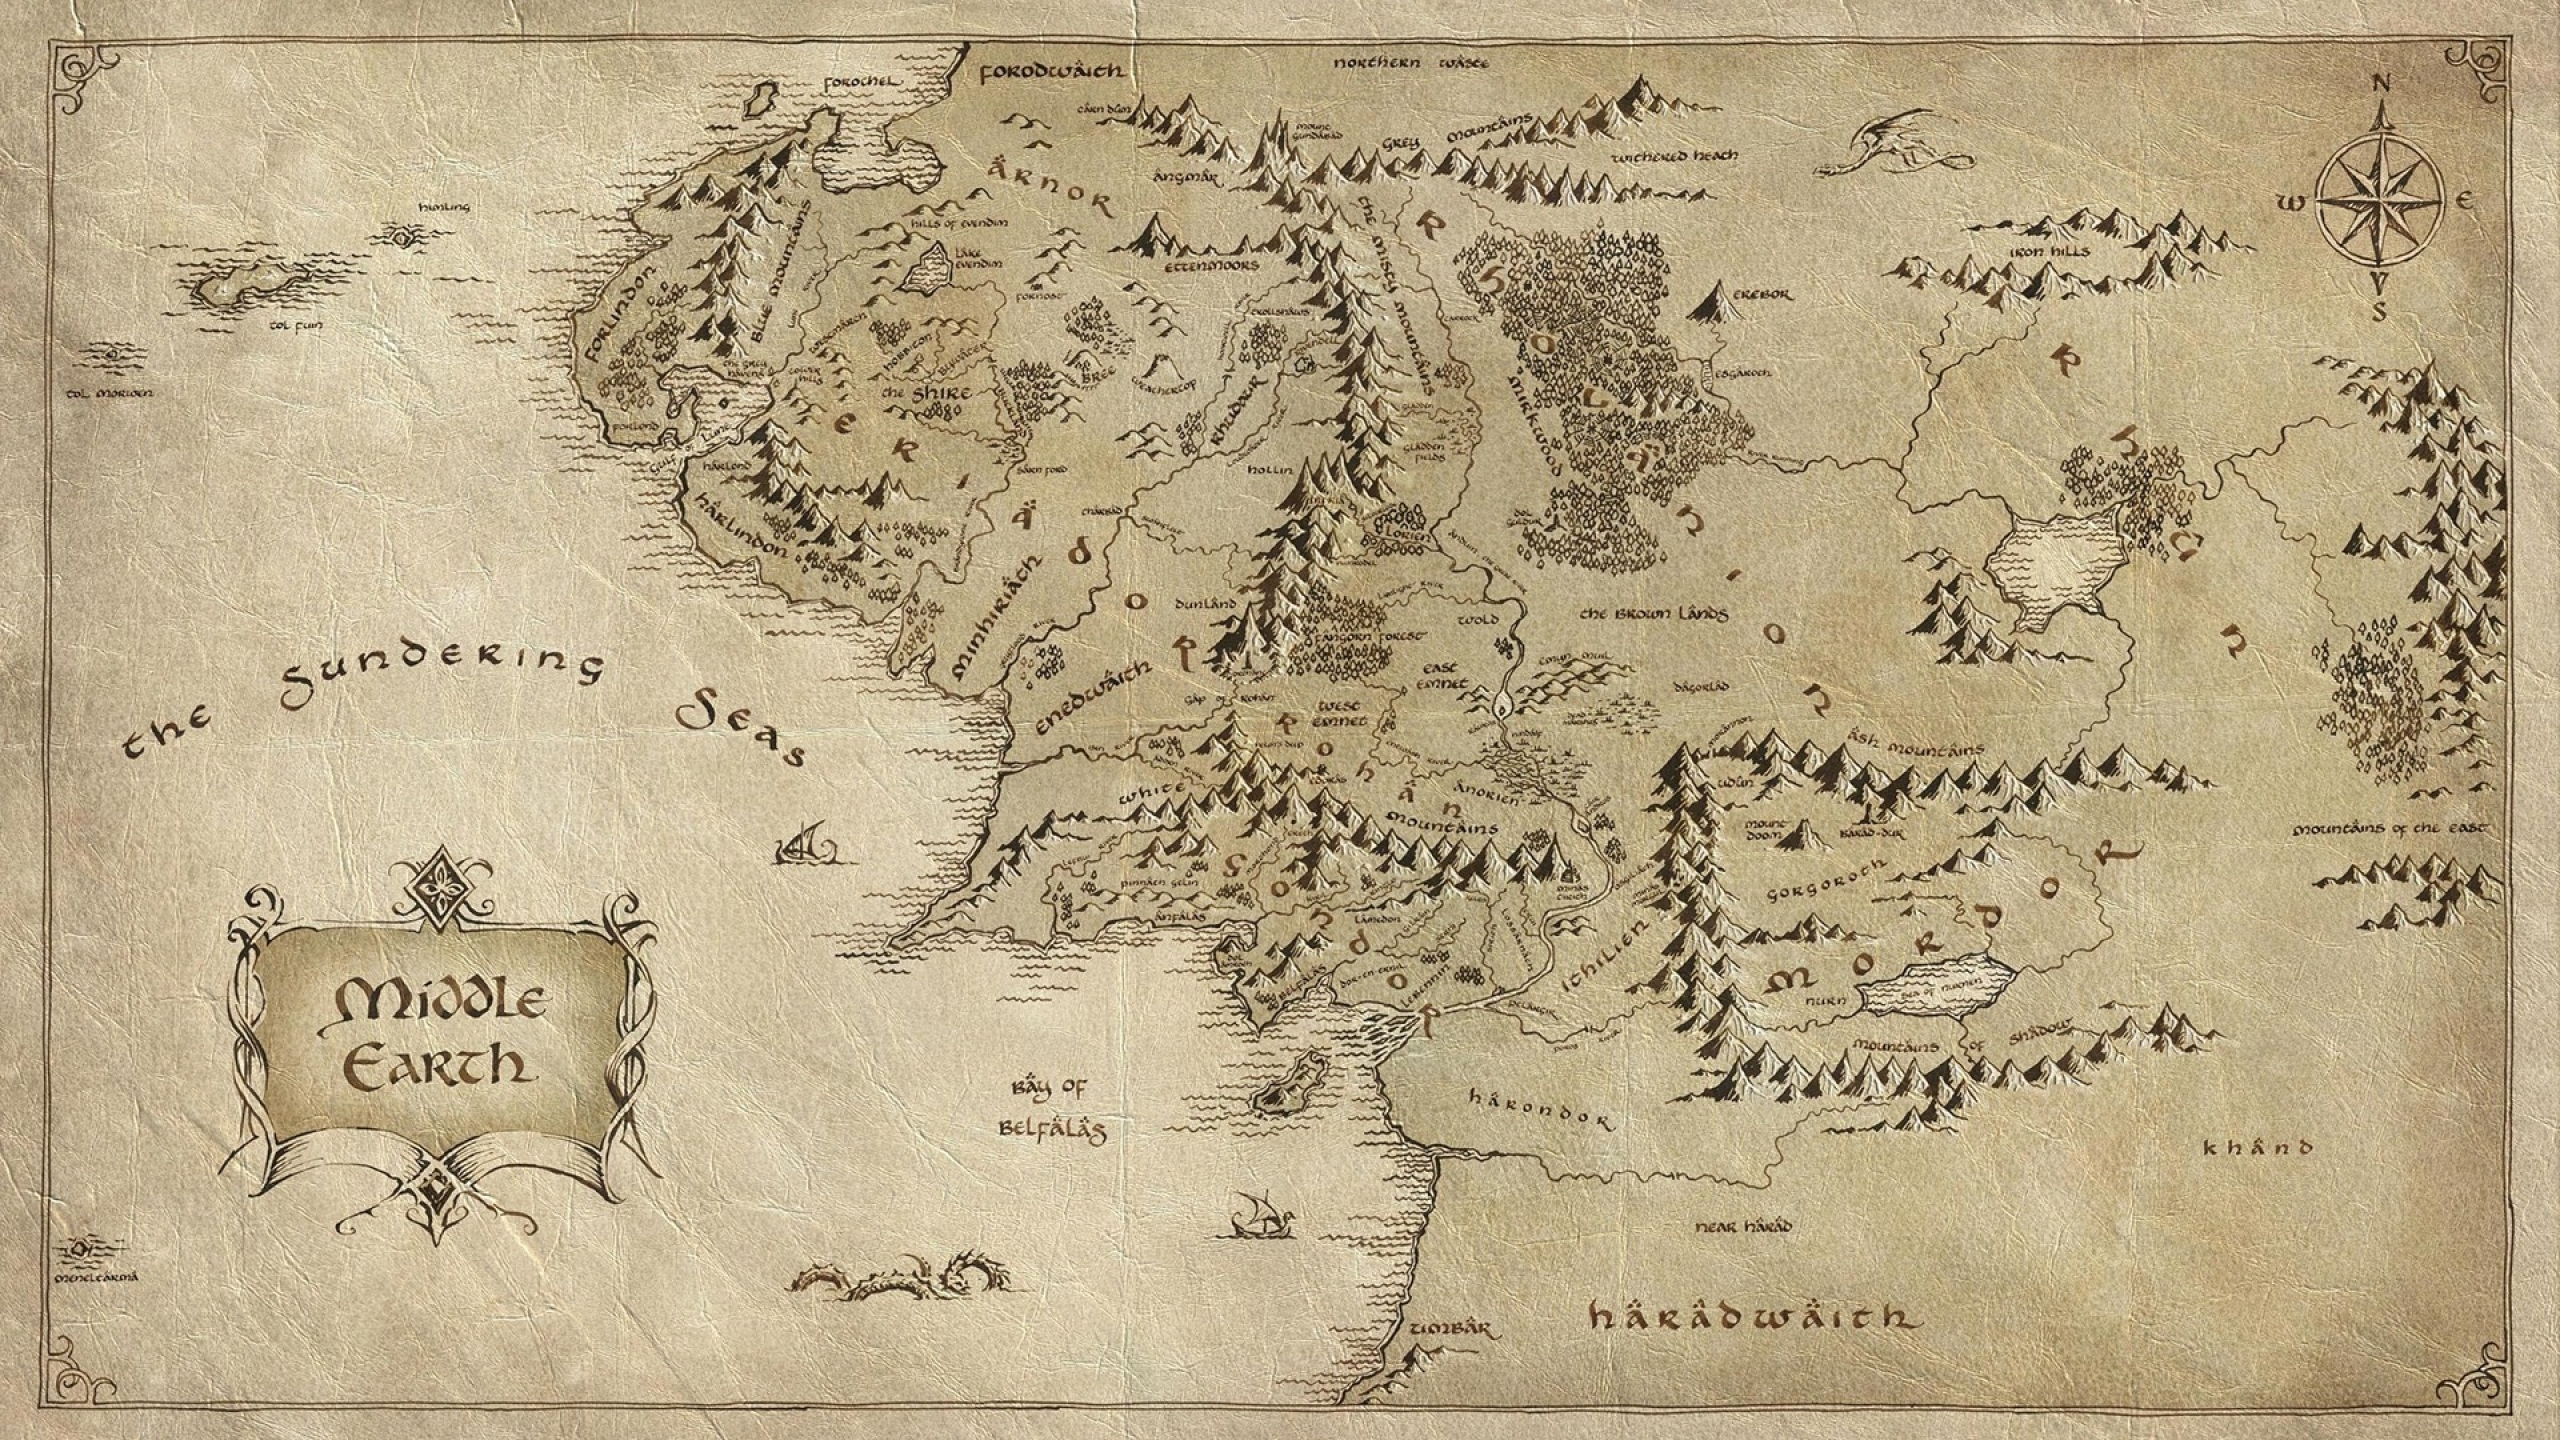  lord of the rings maps middleearth 1920x1080 wallpaper Best Wallpapers